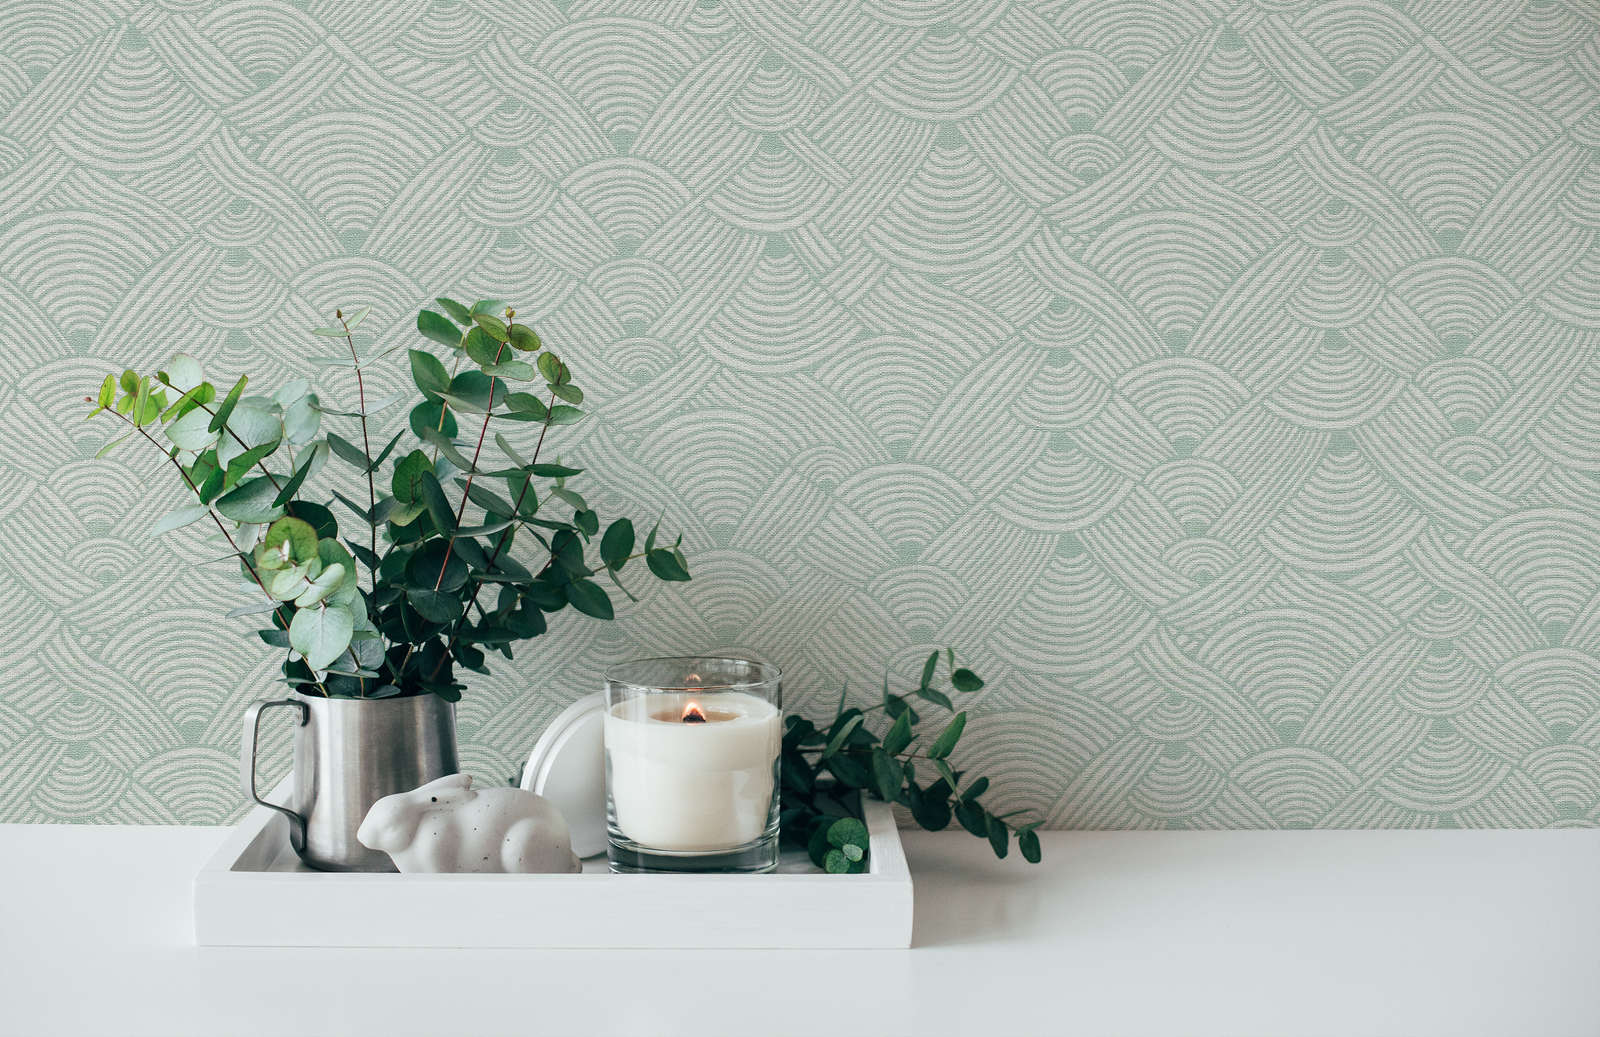             Graphic wallpaper wave pattern in earth colours - green, white, blue
        